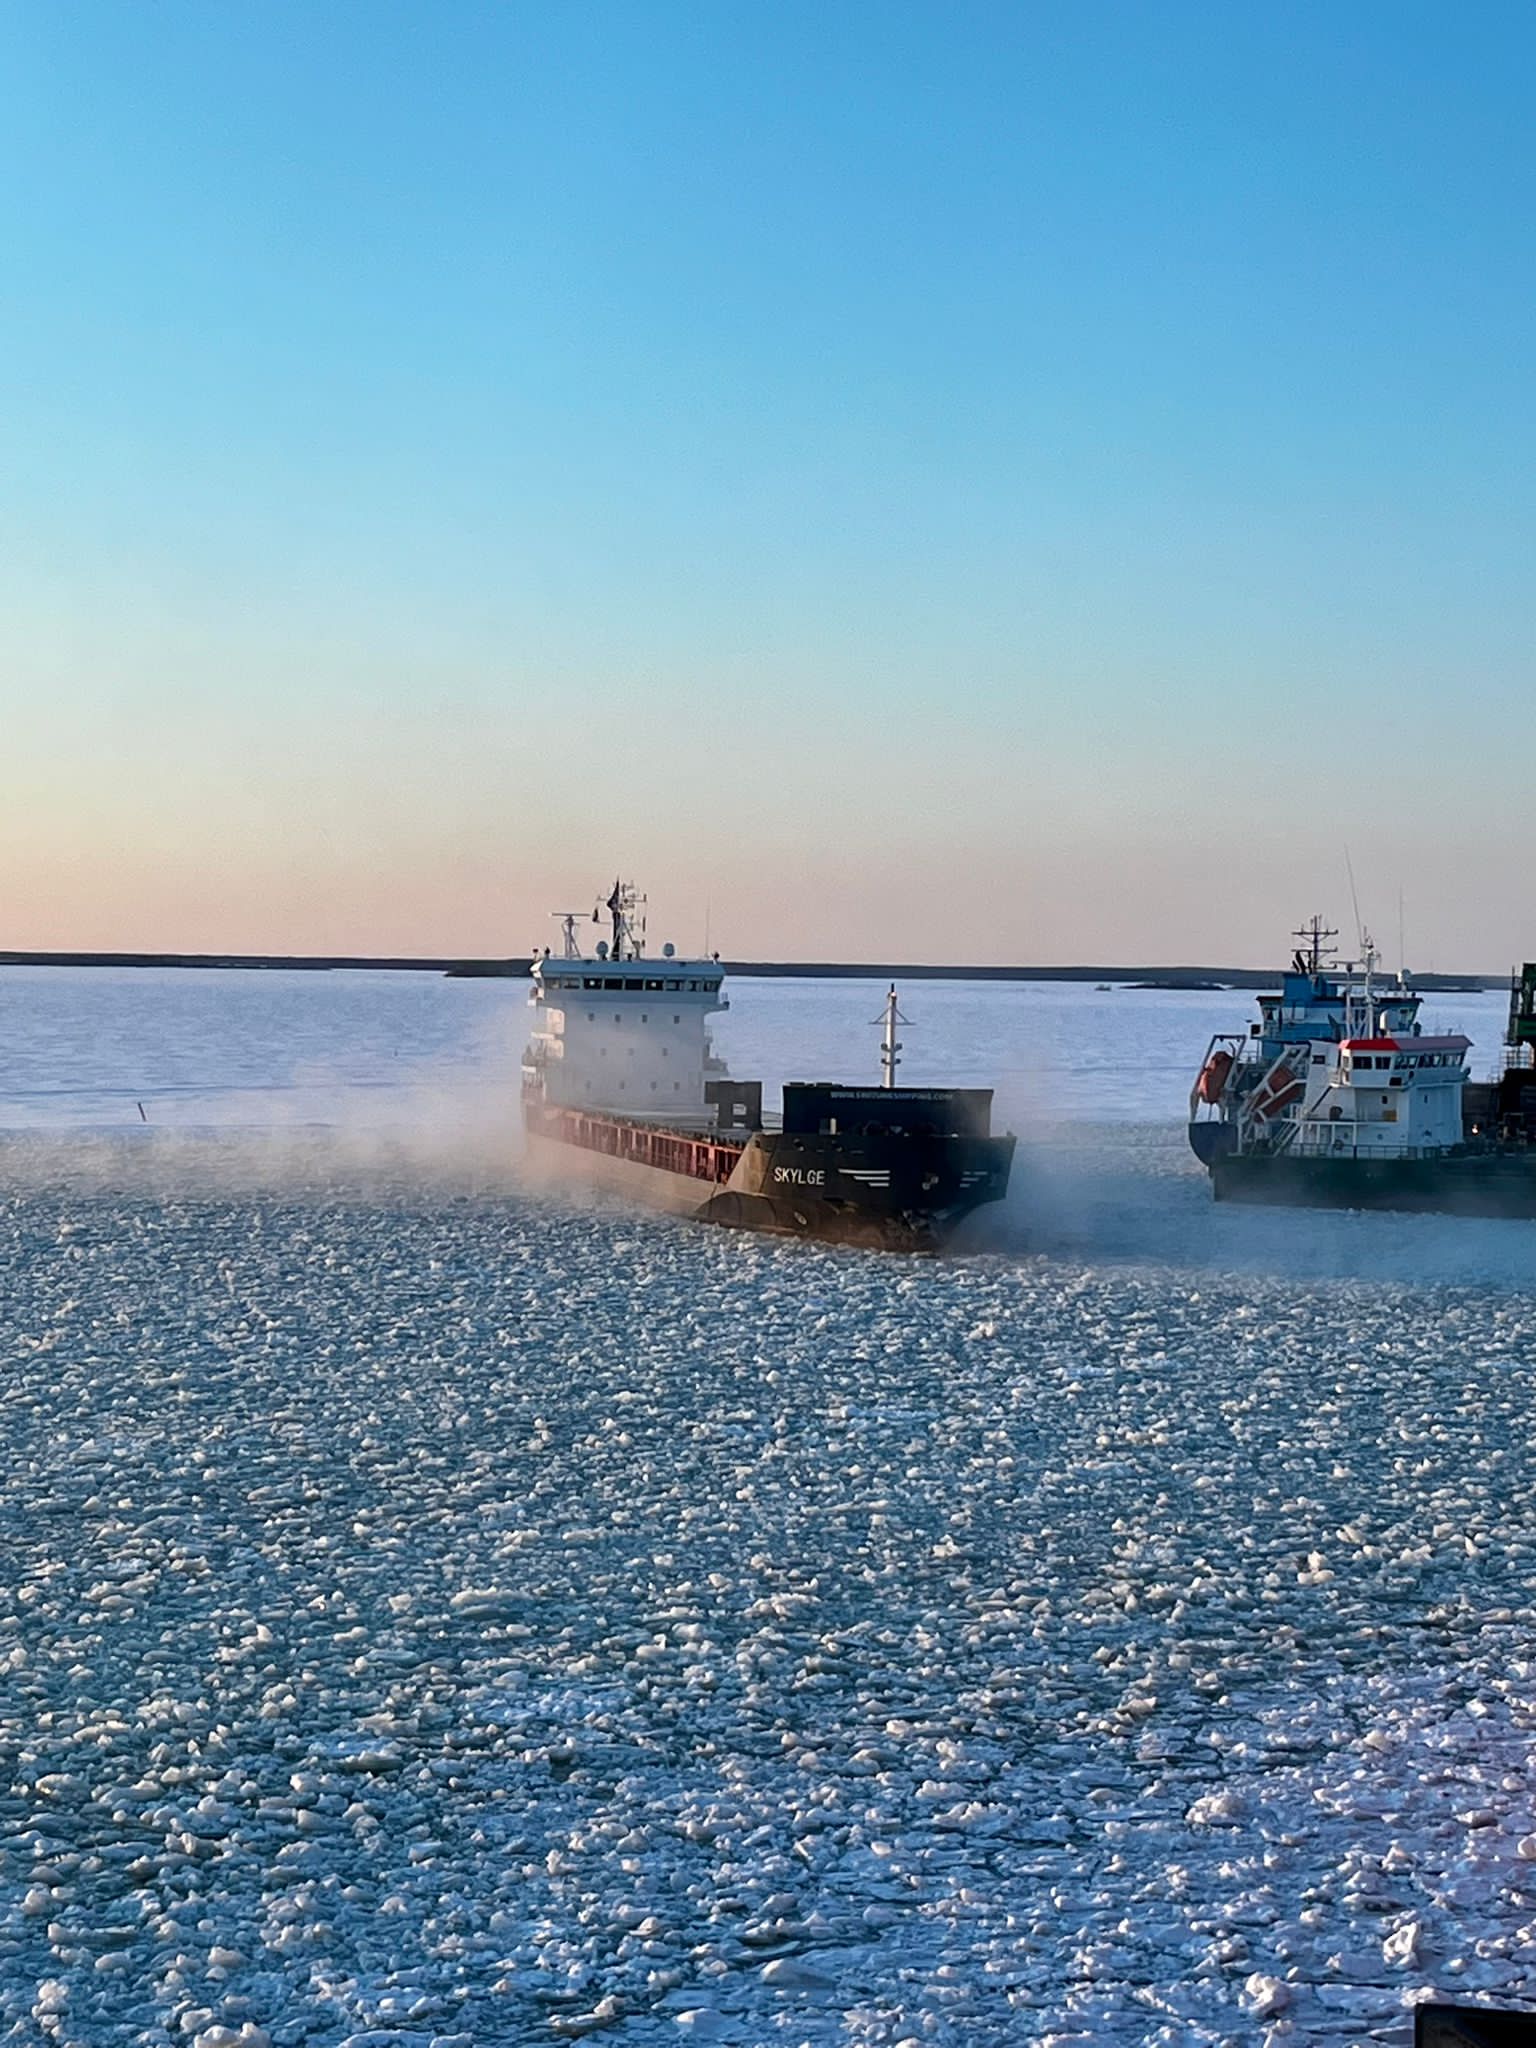 cargo ships working their way through the ice sea in Tornio